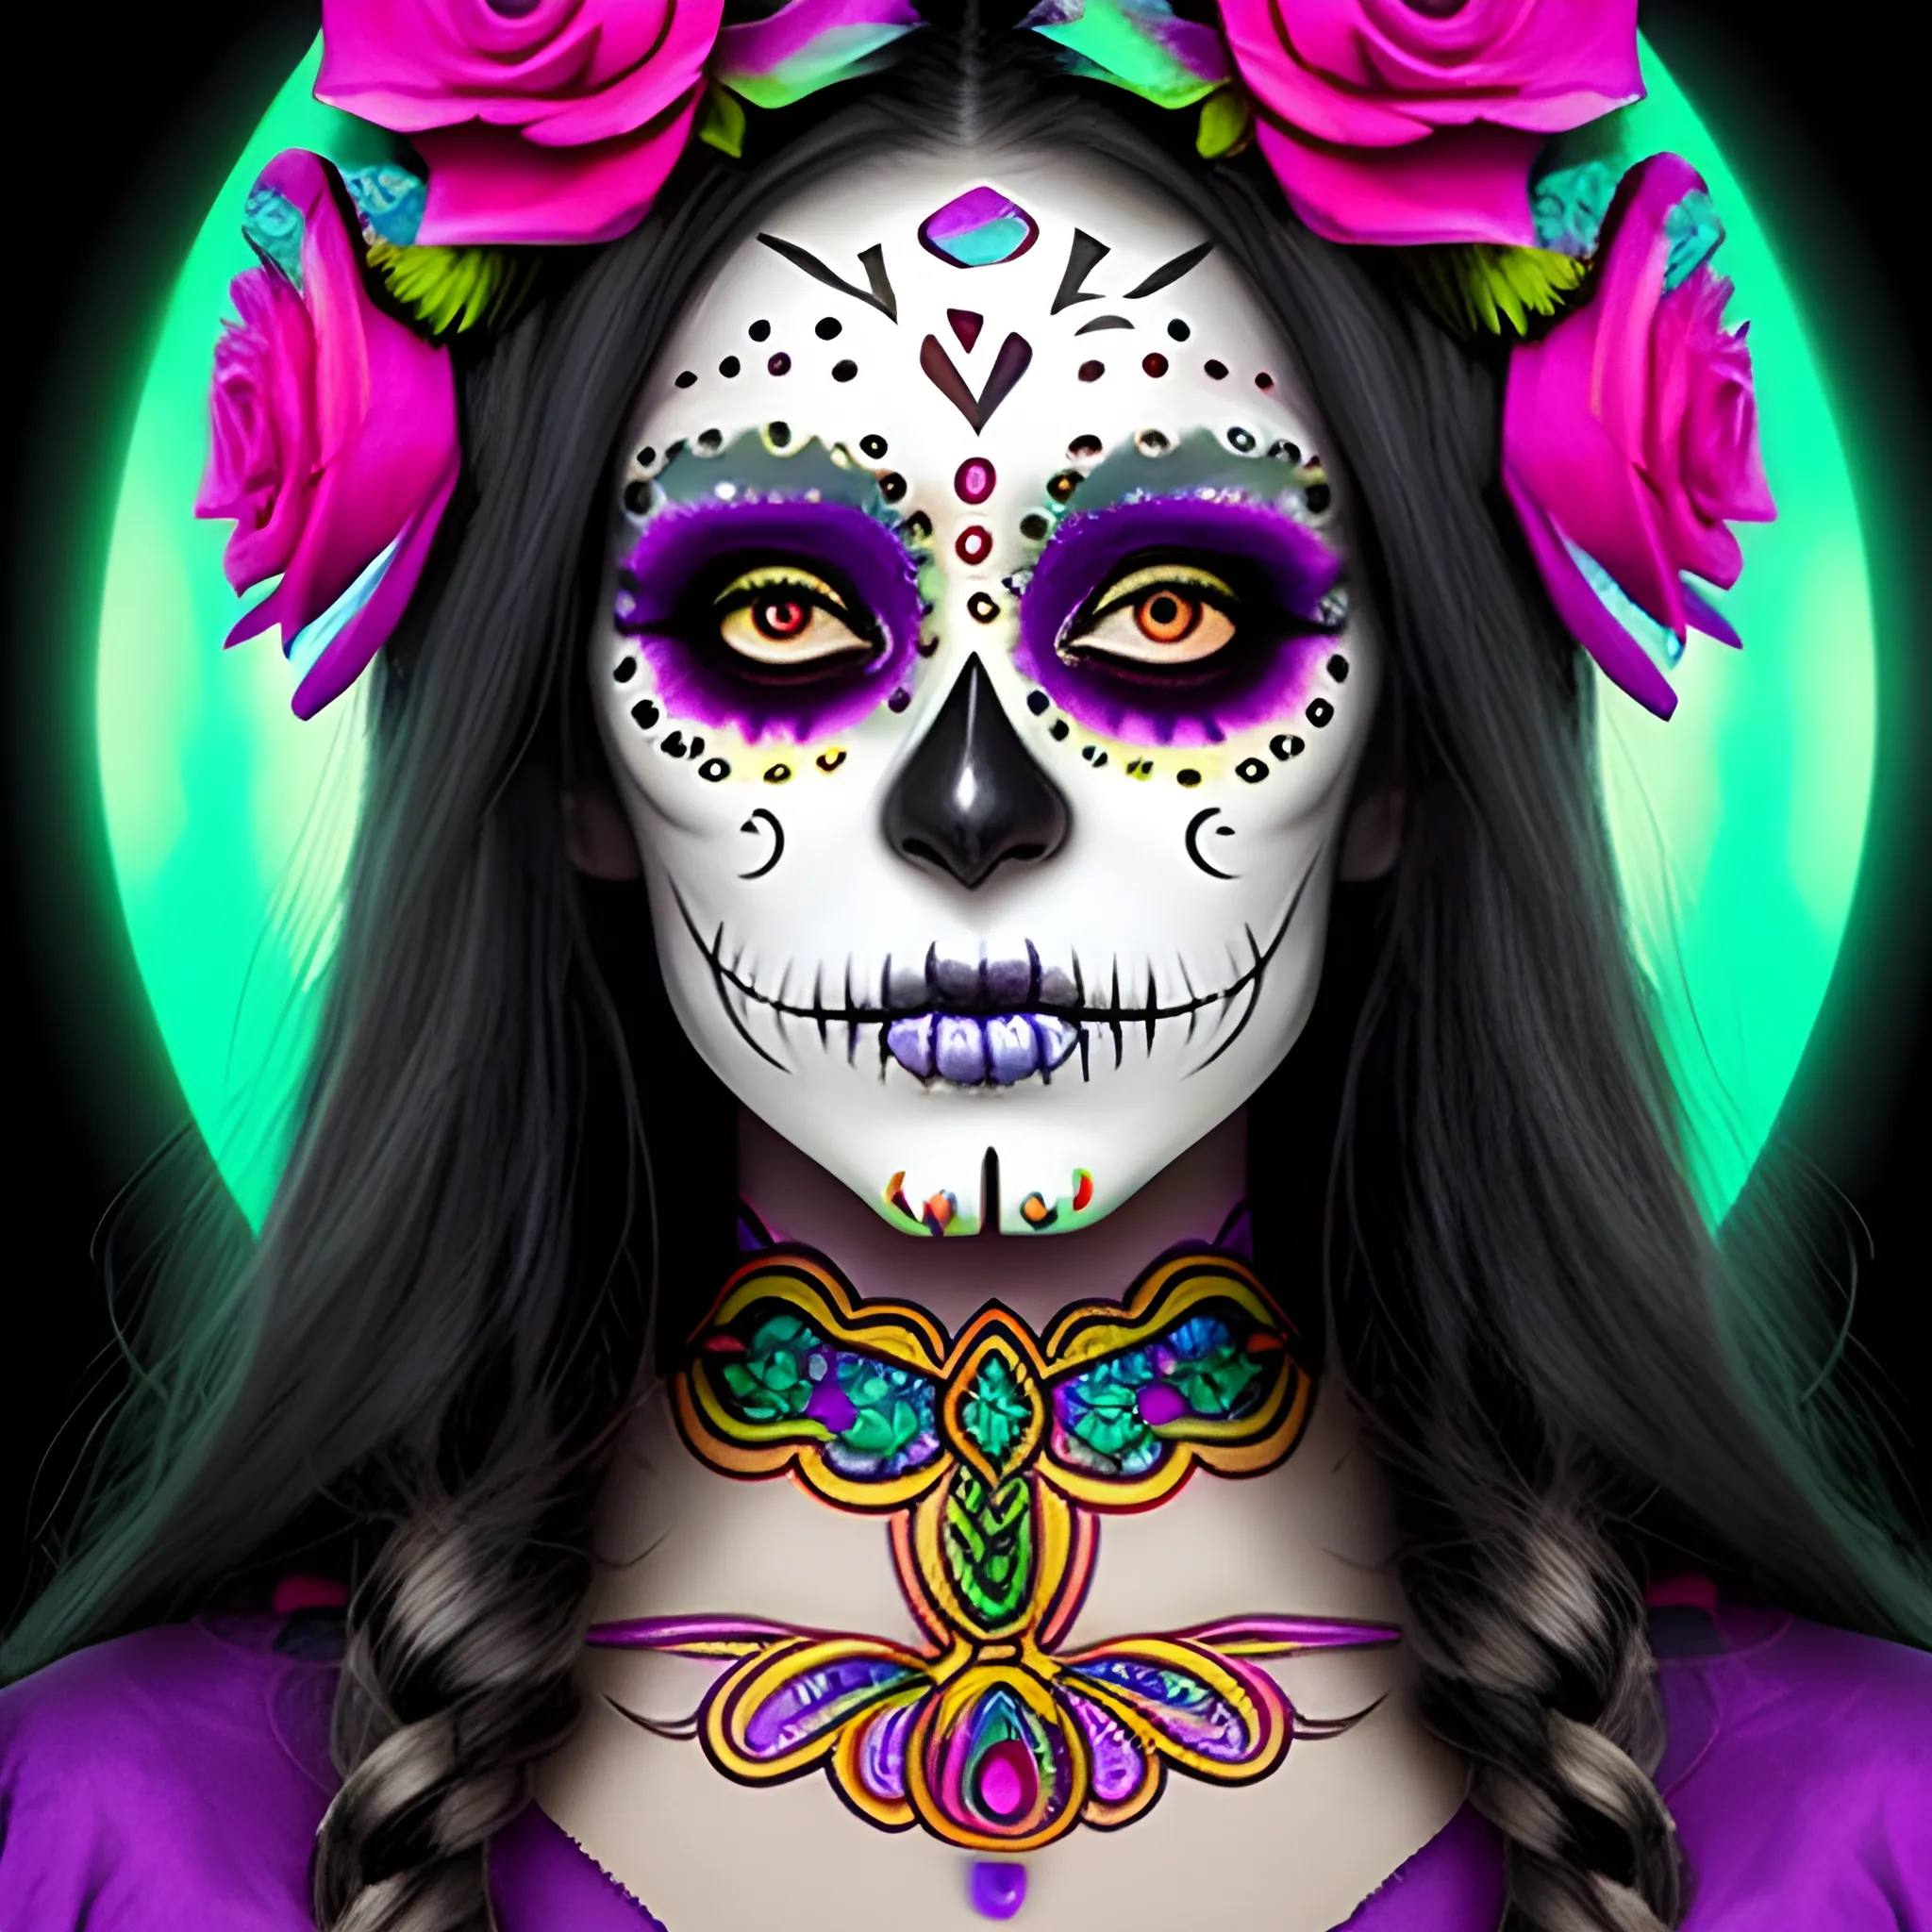 Priestess Day of the Dead makeup, bright colors - Arthub.ai